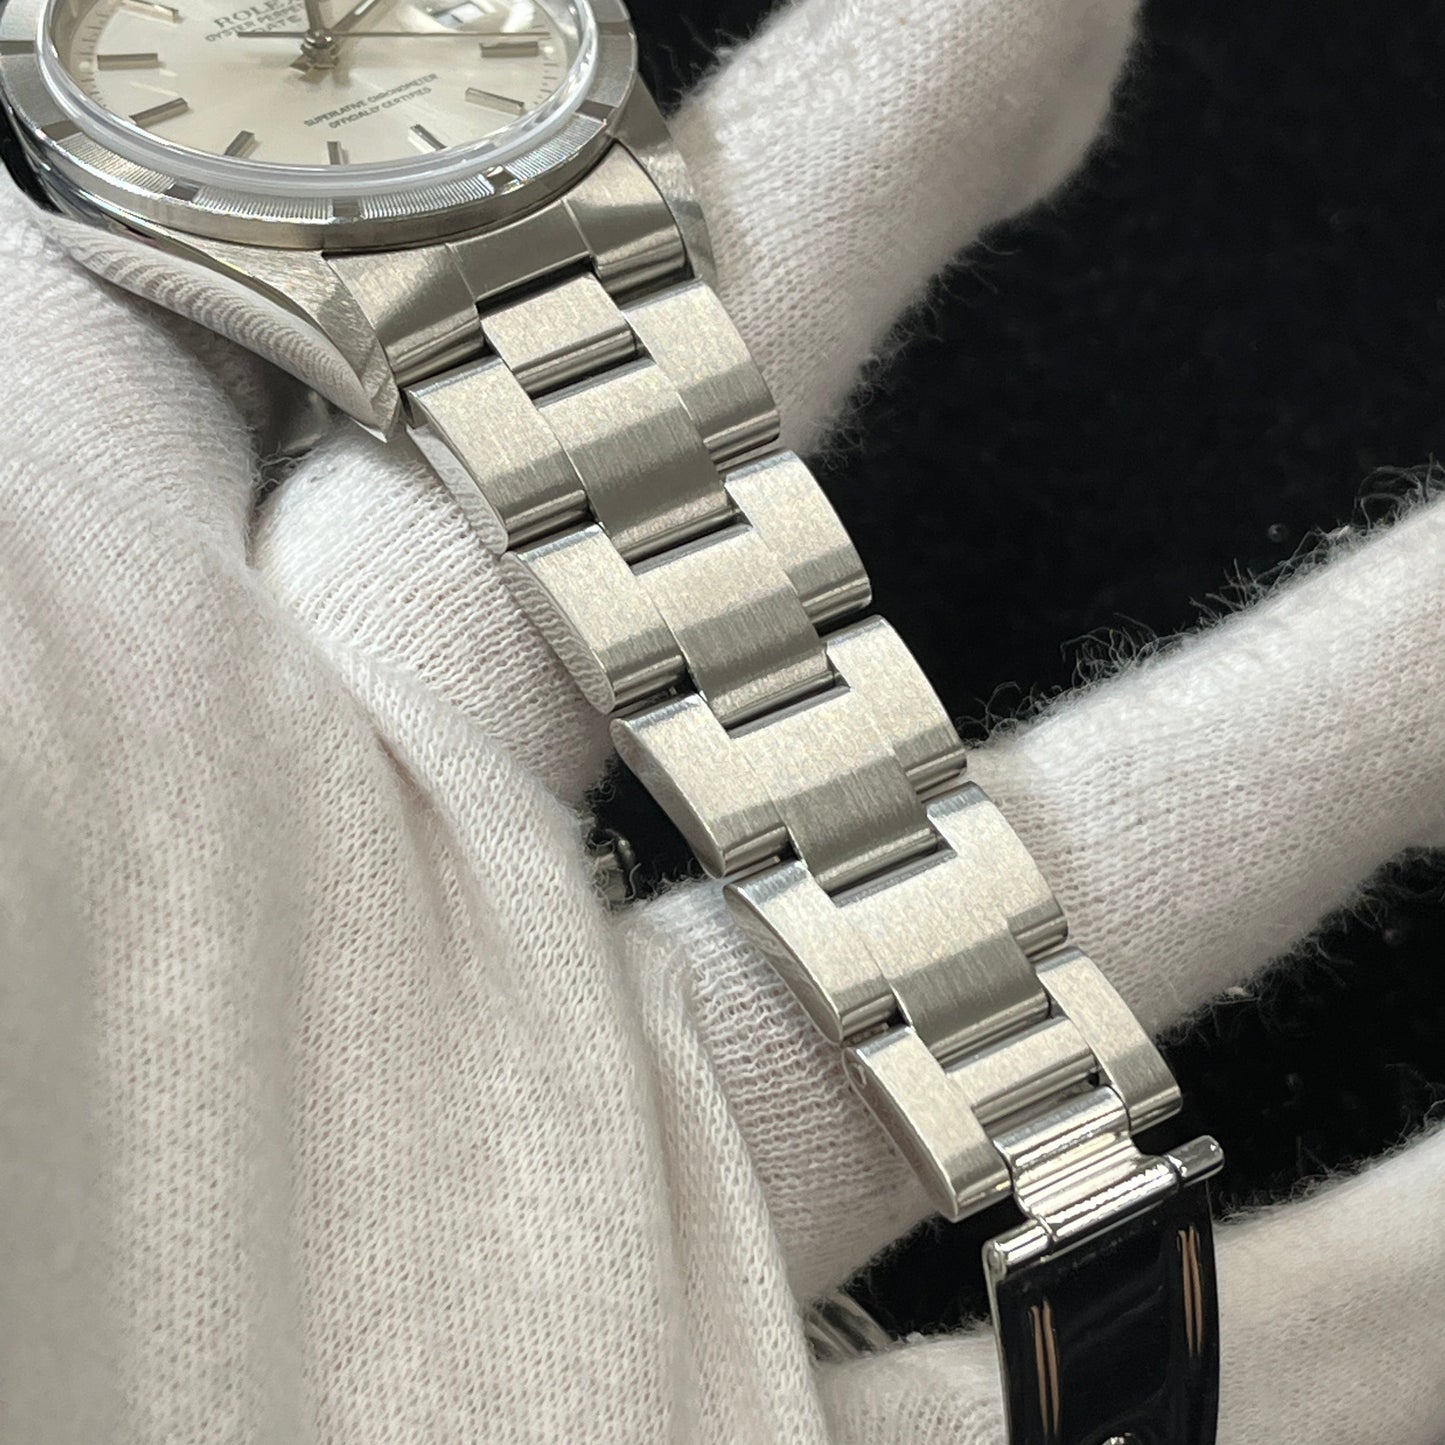 15210　Oyster Perpetual Date A serial　2R-X01-01430